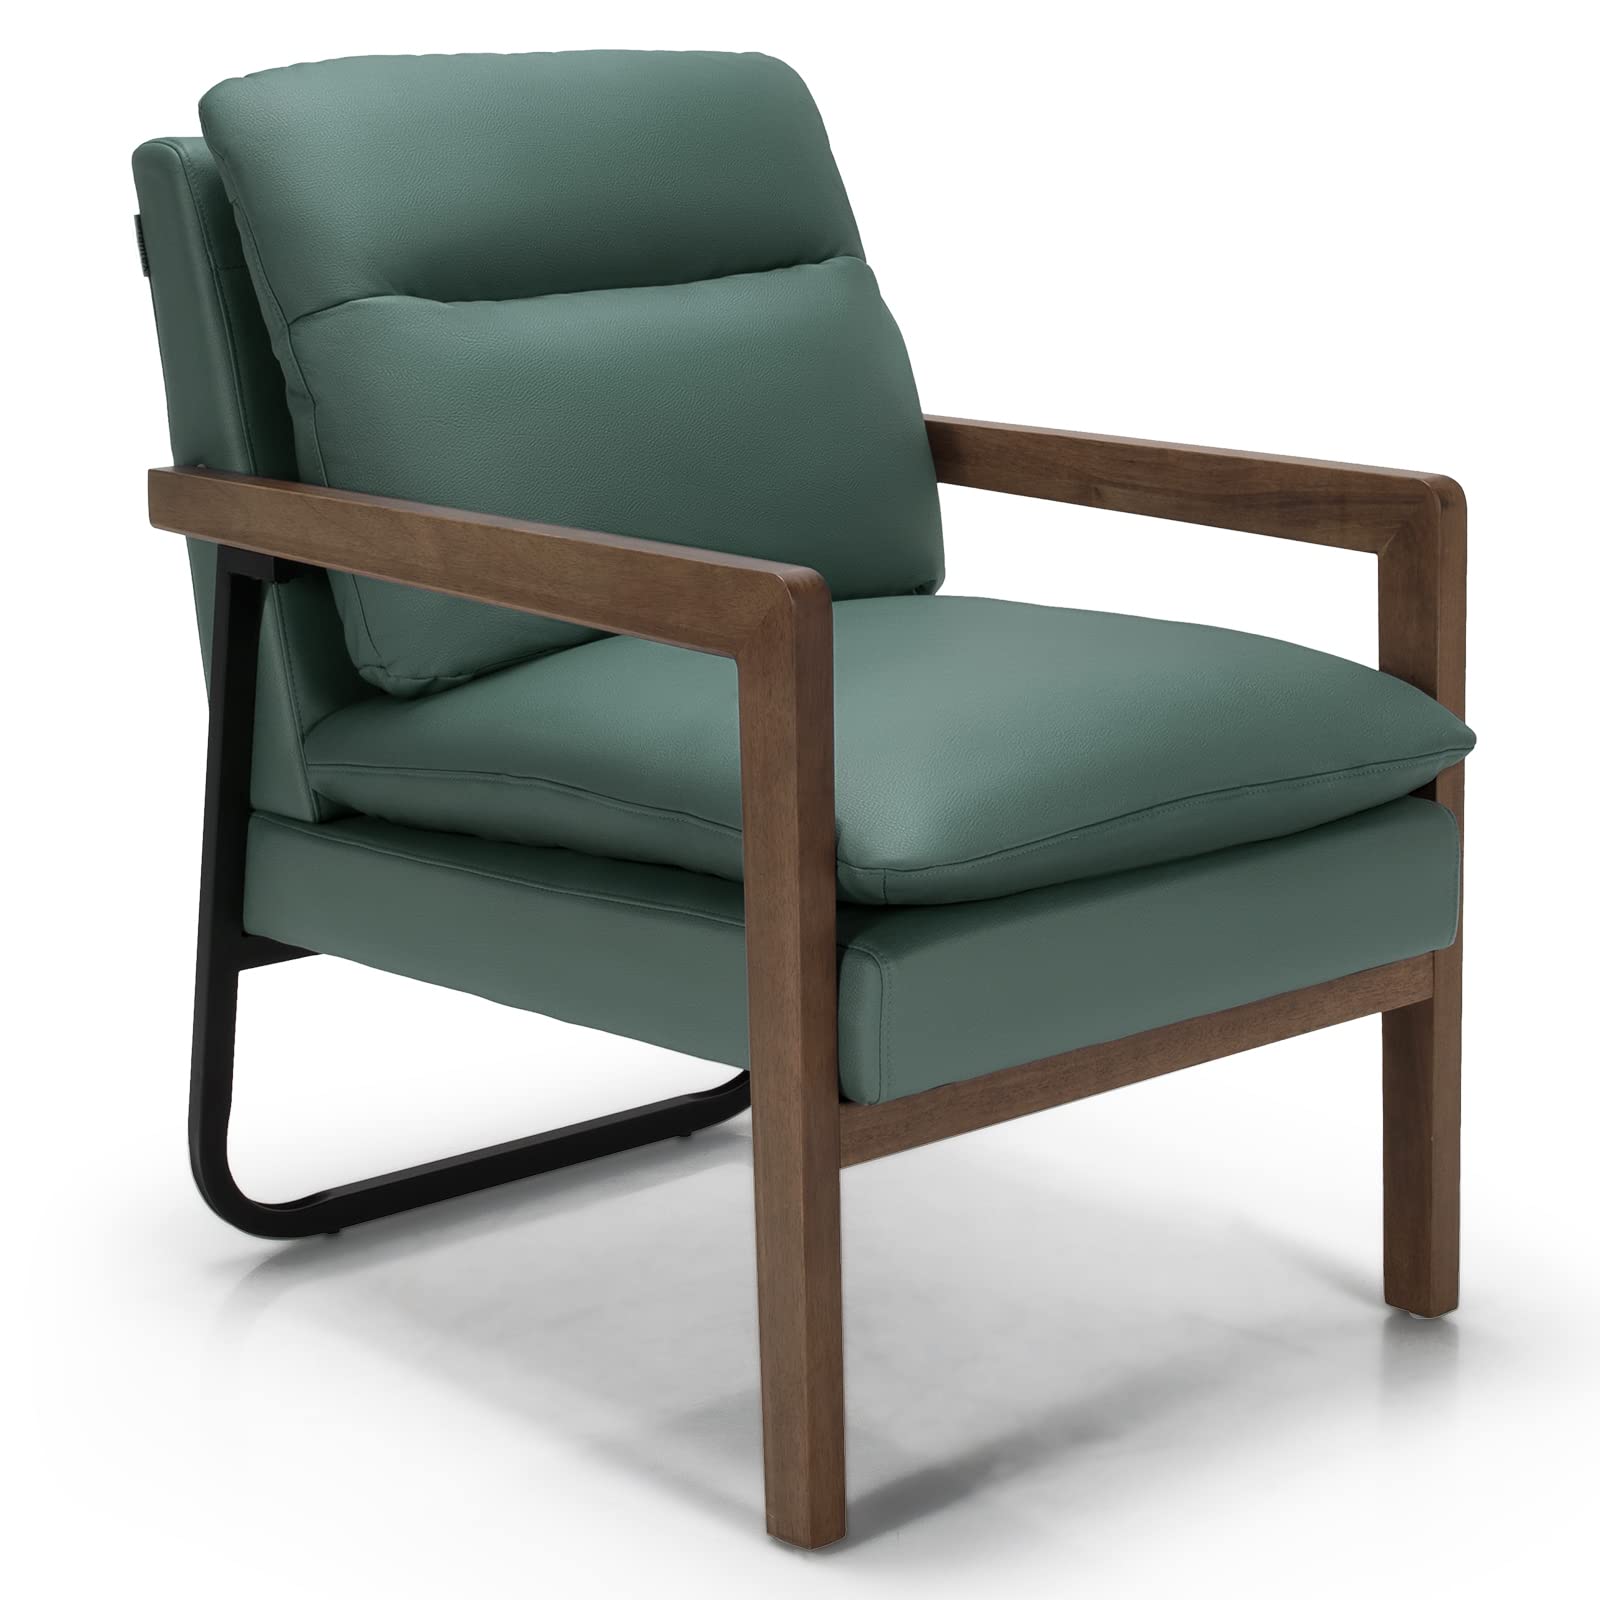 Giantex Accent Chair, Comfy Soft Leathaire Bedroom Chair with Solid Rubber Wood Legs